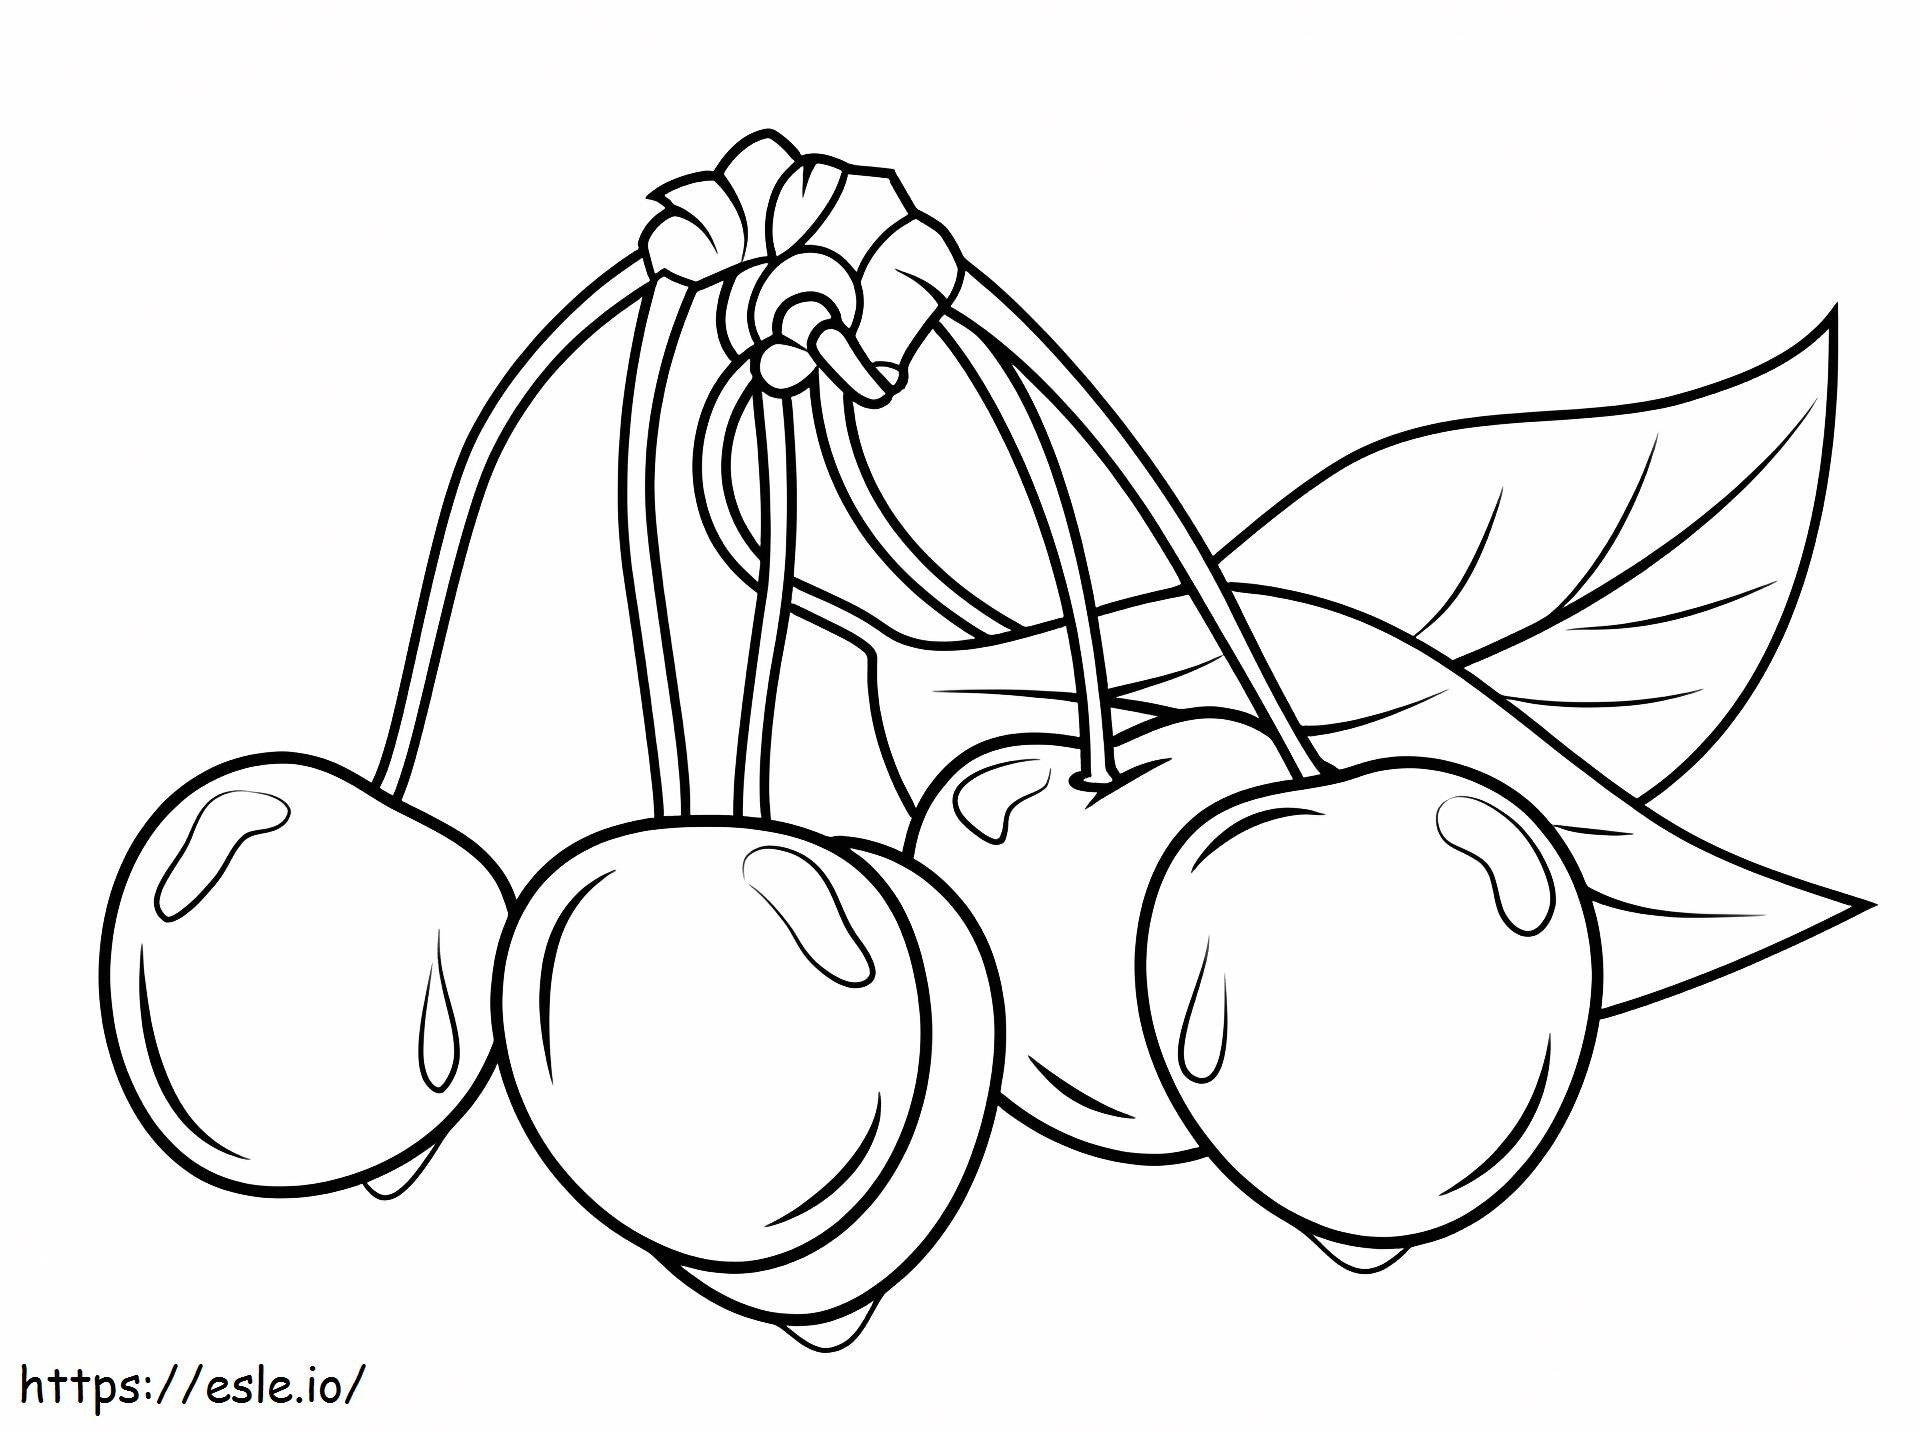 Cherries With Leaves coloring page